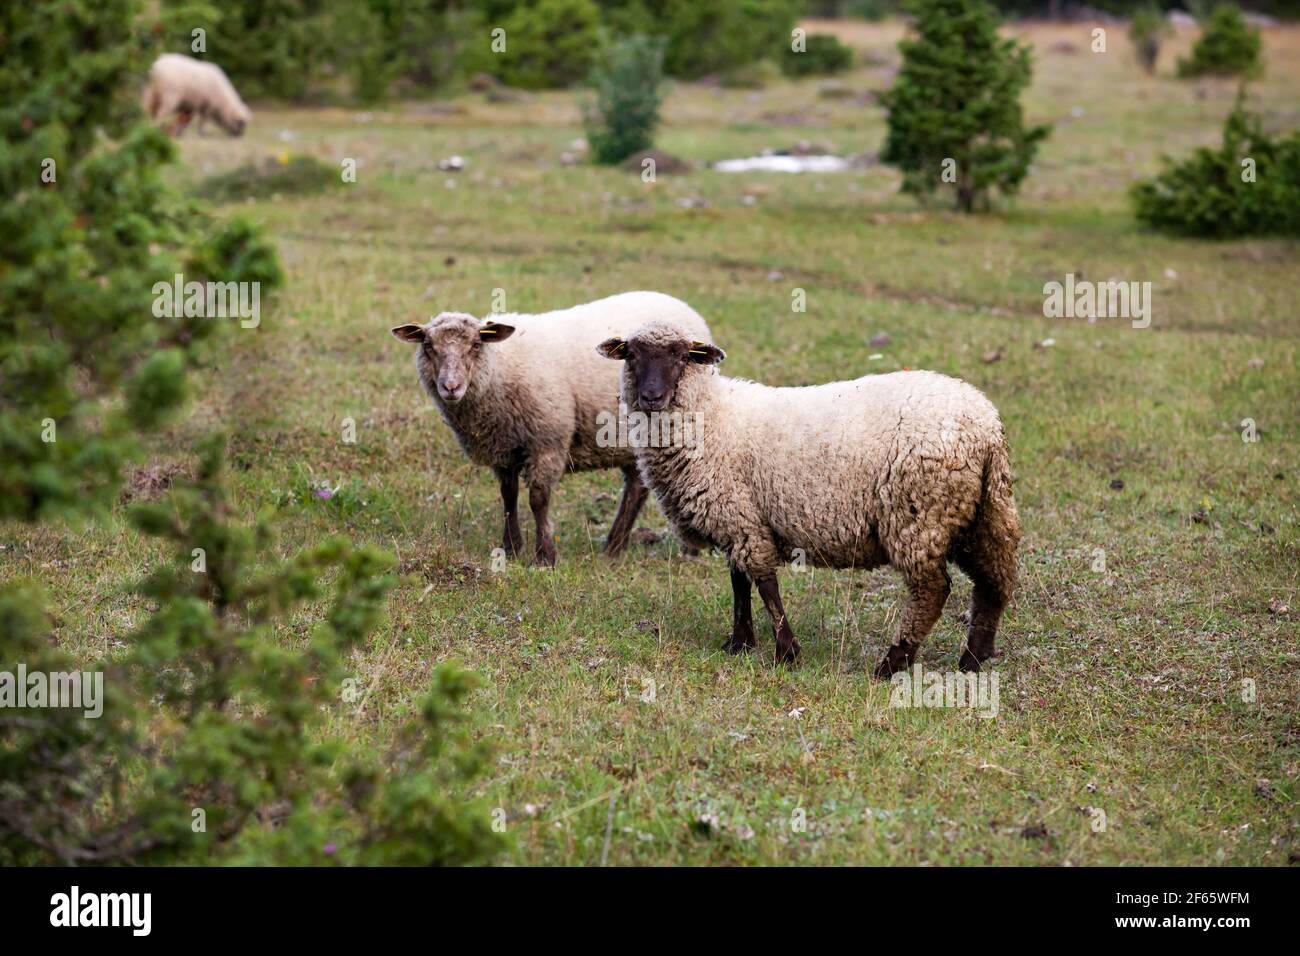 Two grey long-wool sheeps (lambs) on green grass field with juniper trees. Stock Photo